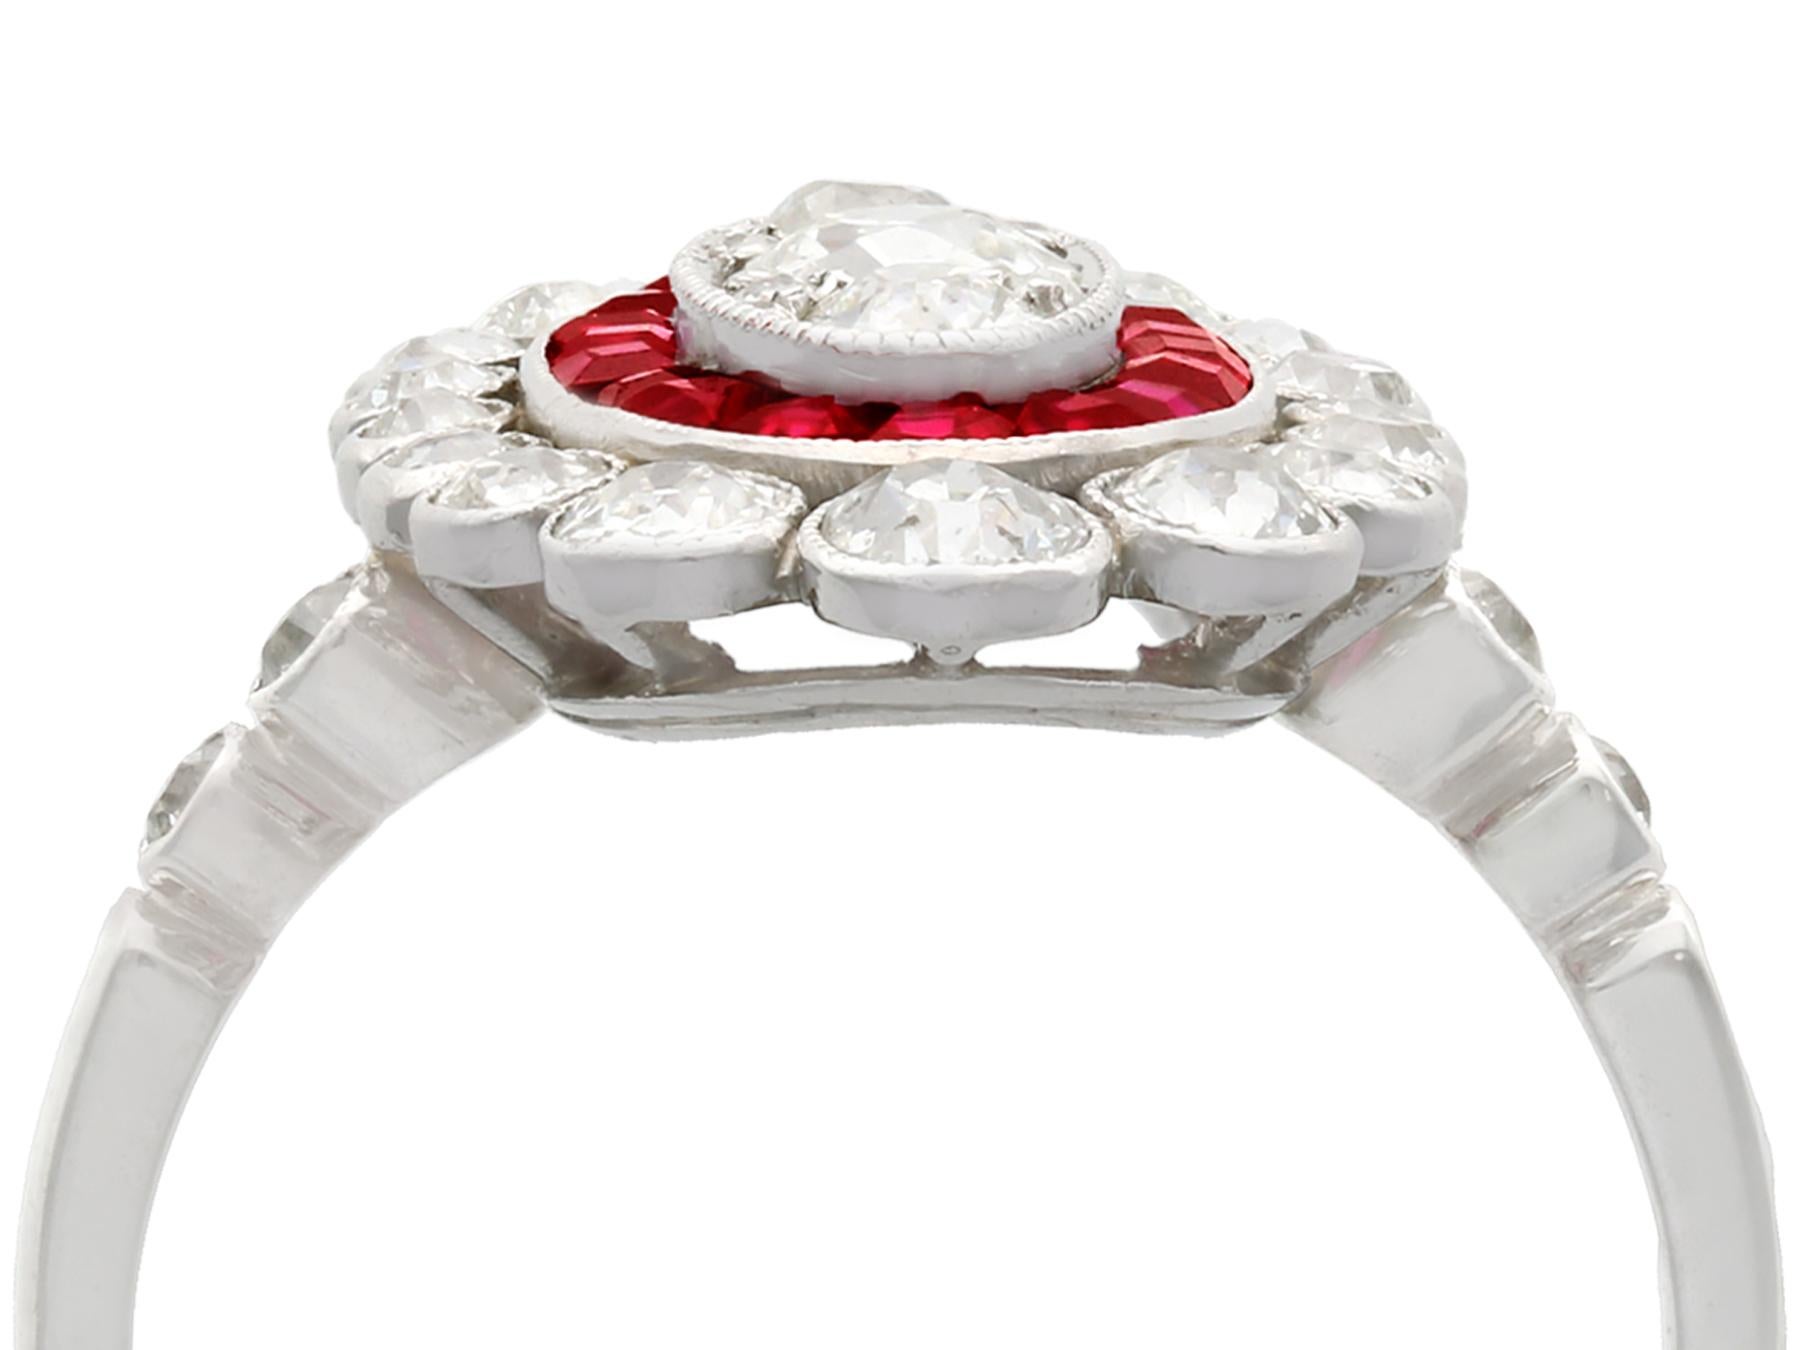 A stunning antique 1.60 carat diamond and 0.60 carat ruby, platinum cluster style cocktail ring; part of our diverse antique jewelry and estate jewelry collections.

This stunning, fine and impressive diamond and ruby ring has been crafted in